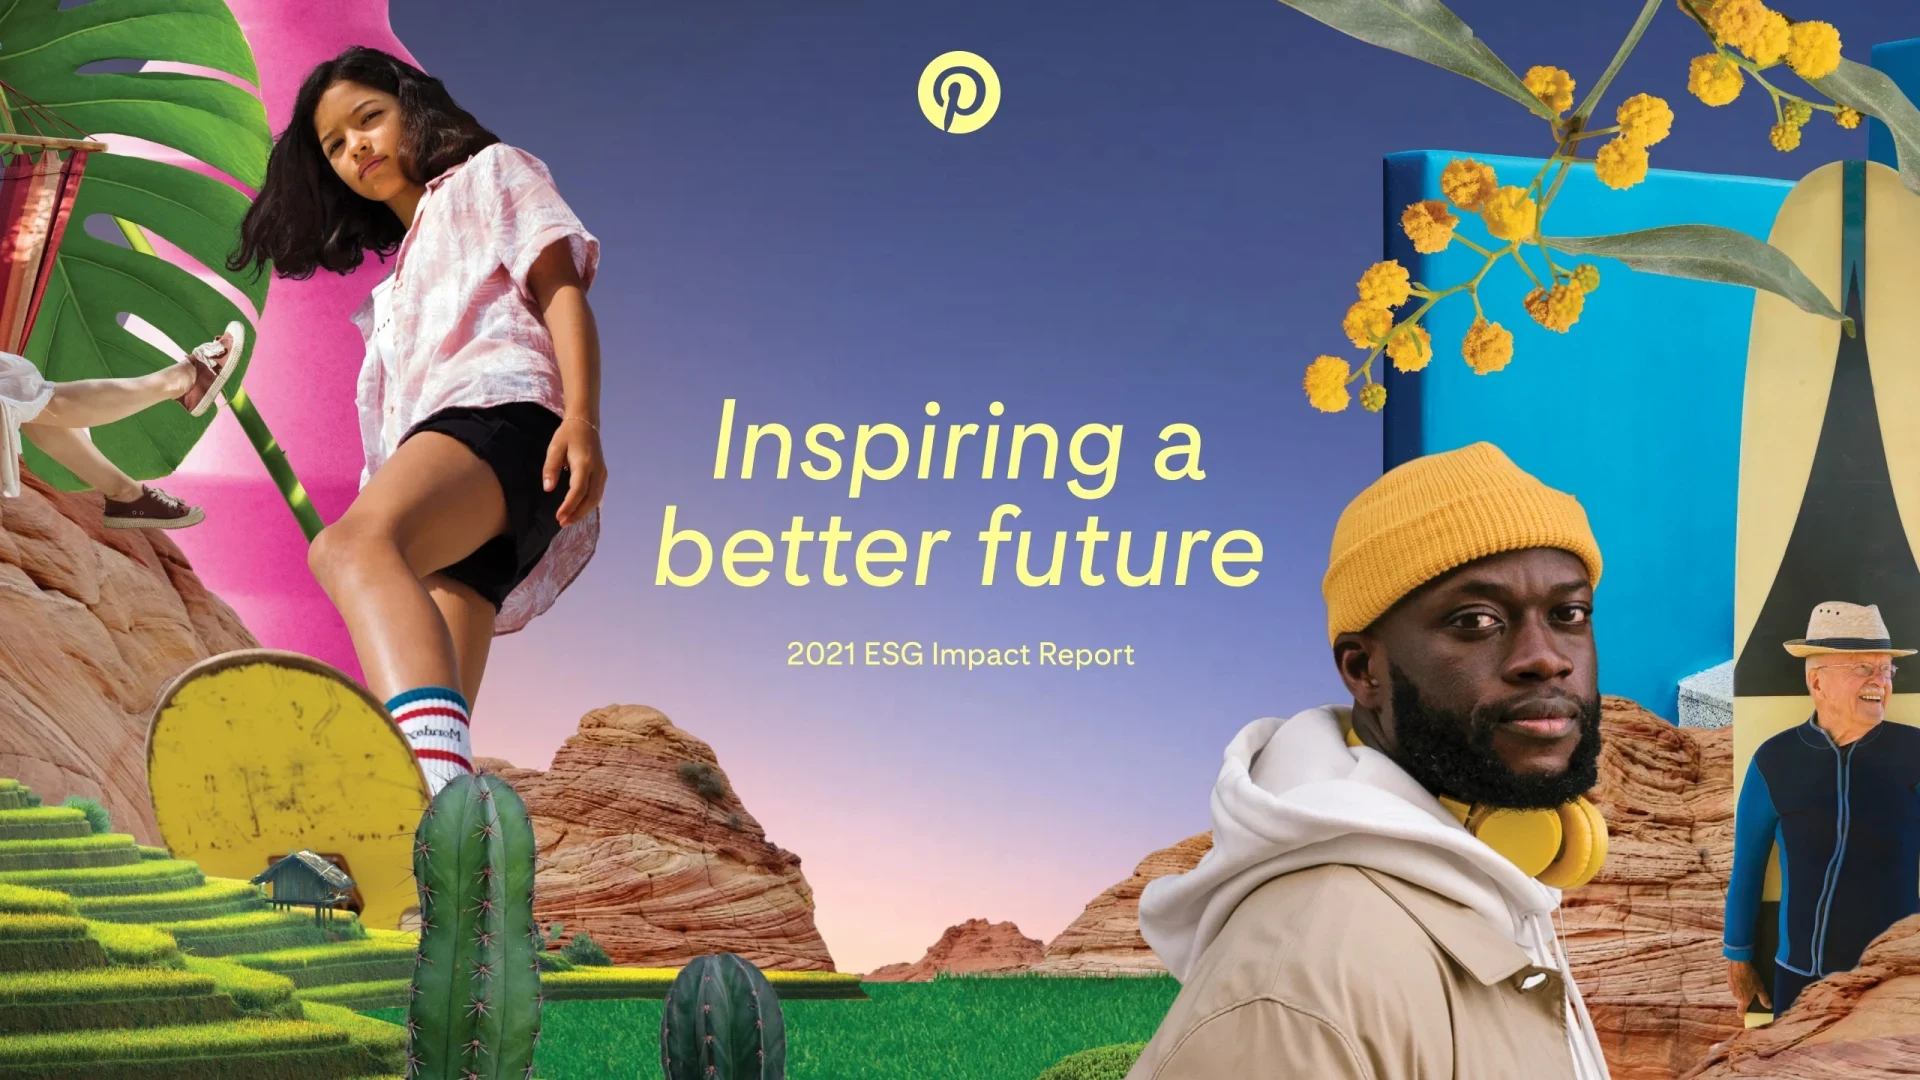 A colorful collage of Pinterest-inspired images surrounds the words "Inspiring a better future"